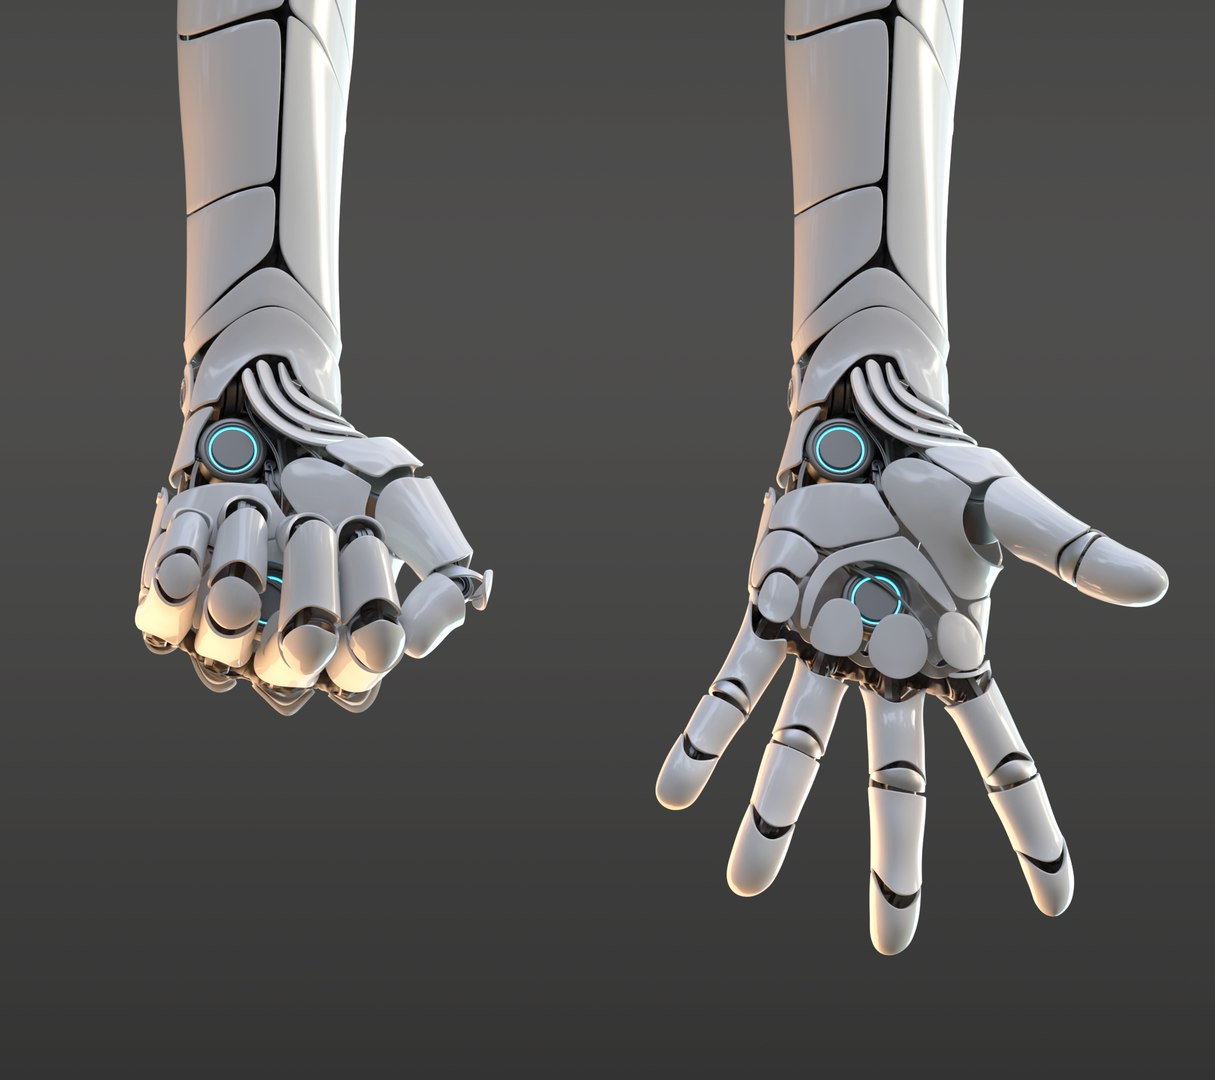 robot hand in zbrush with shadow box